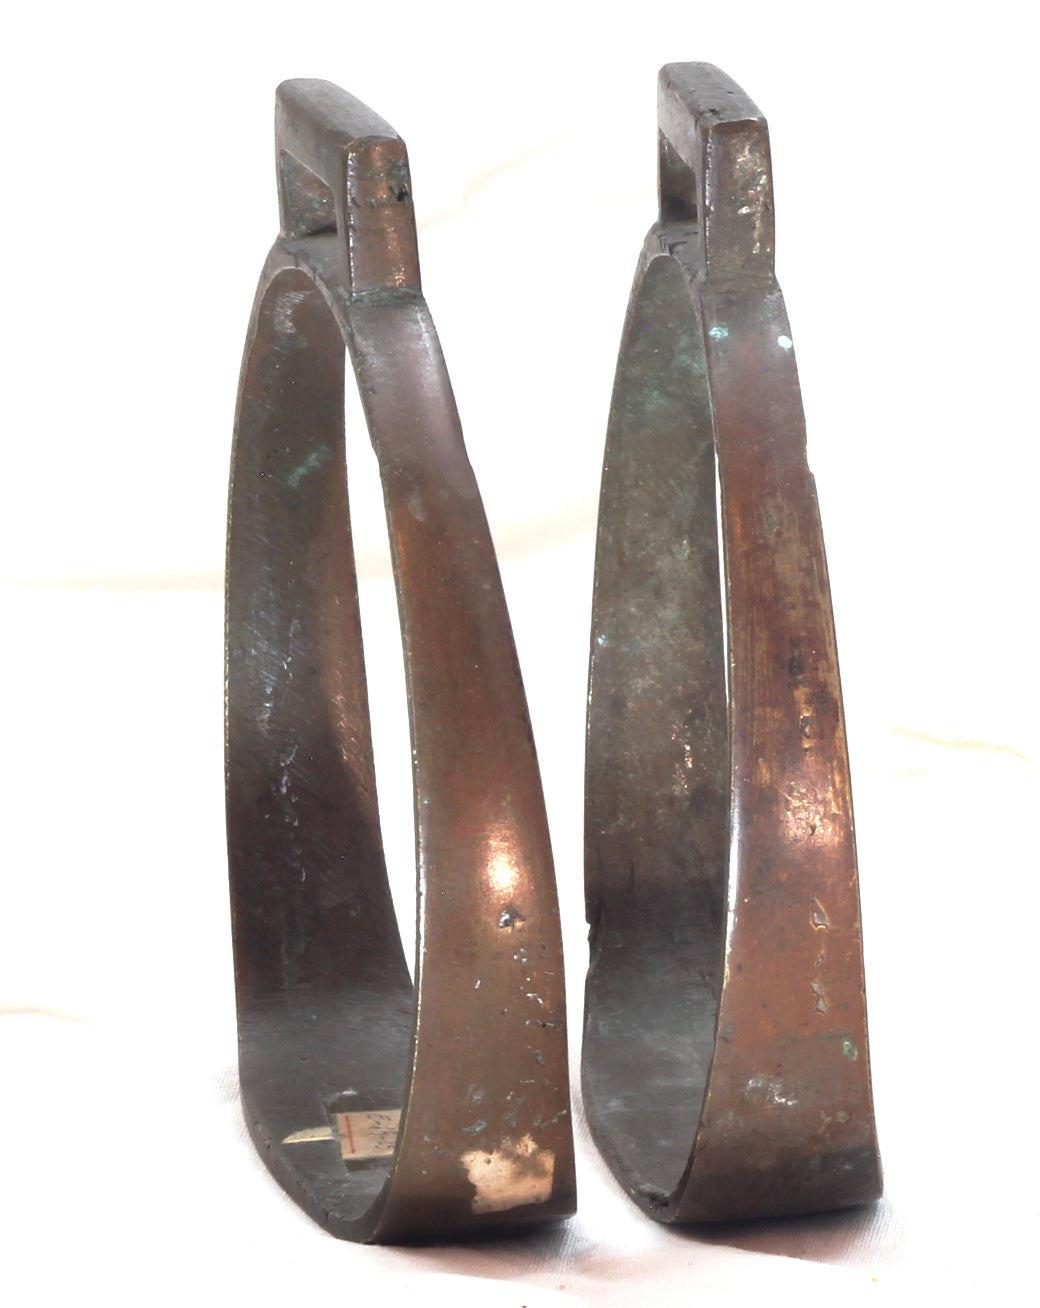 A Pair of French / Belgian Military Stirrups